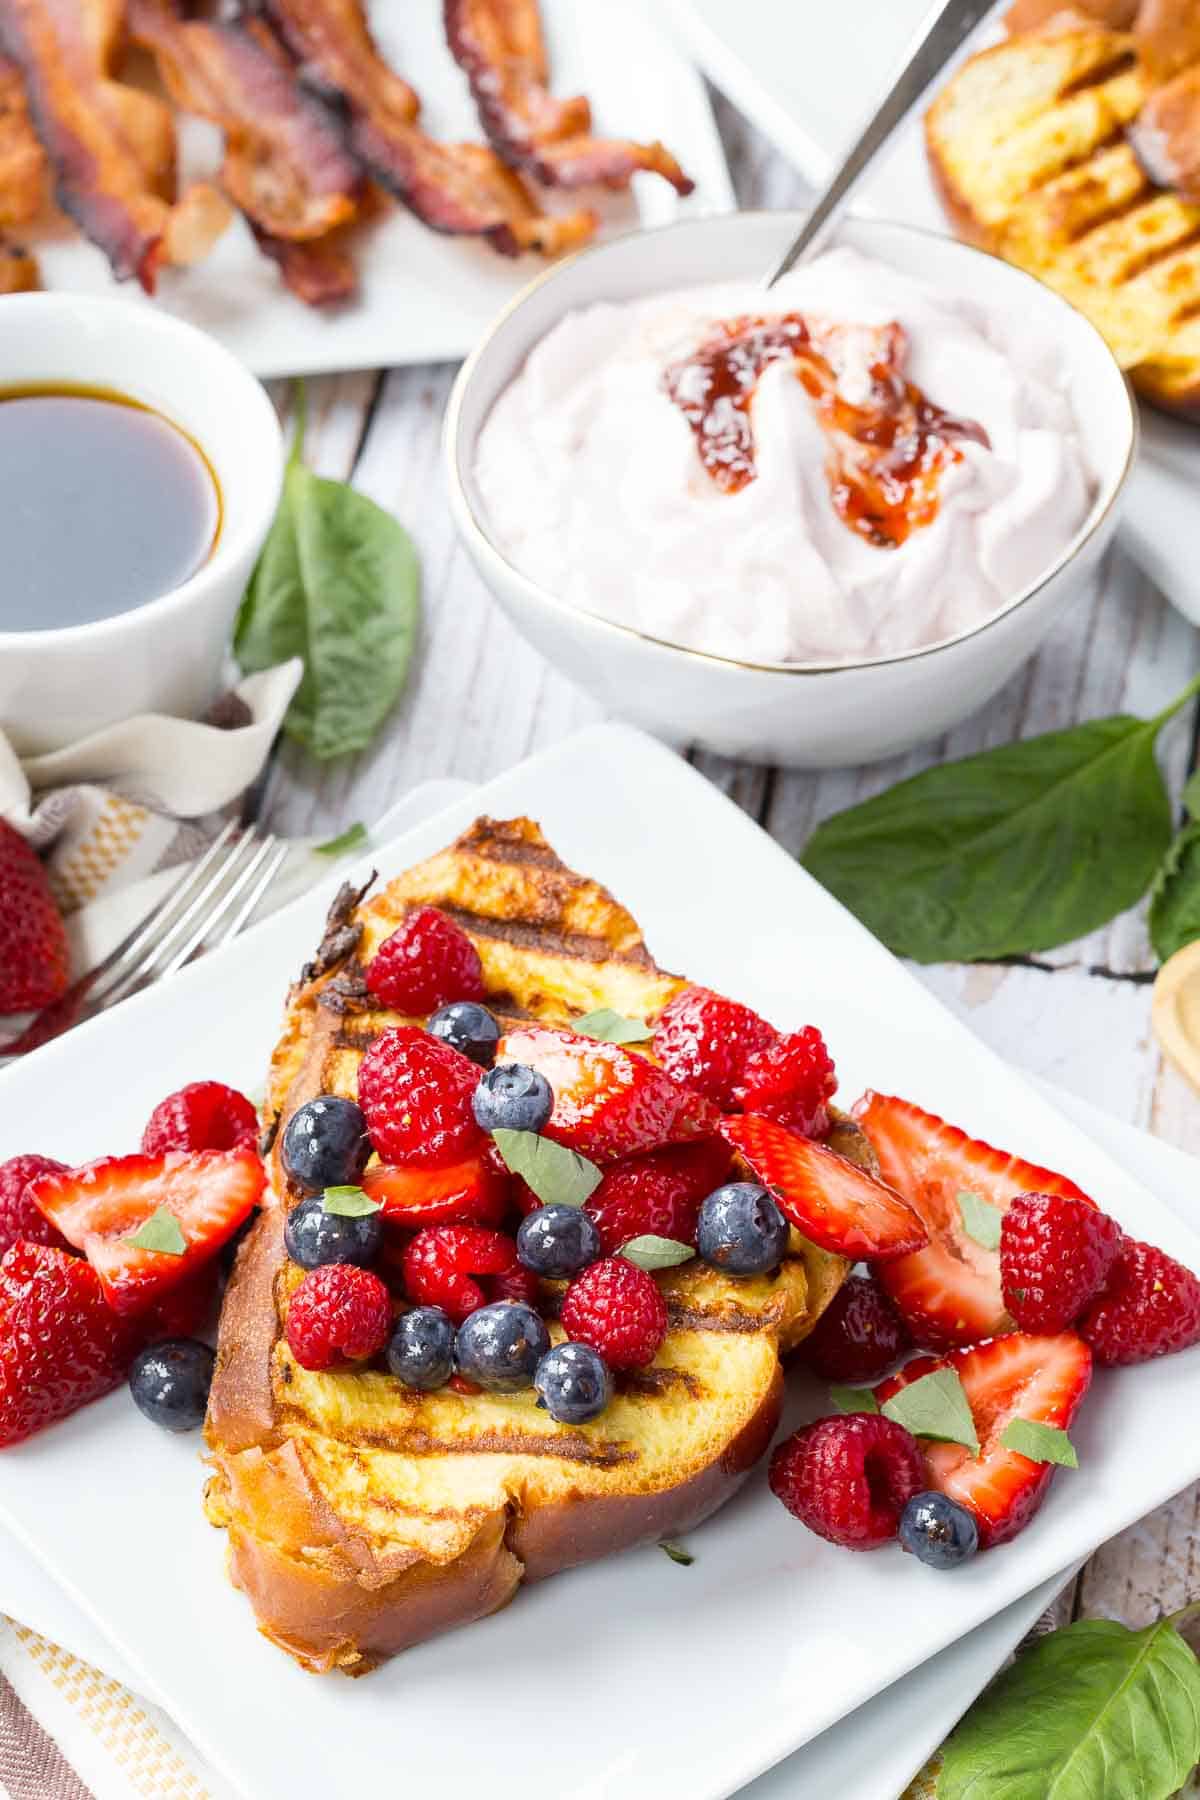 Slices of grilled French toast on a square plate garnished with mixed berries, next to a bowl of yogurt, a plate of bacon, and more French toast in the background.